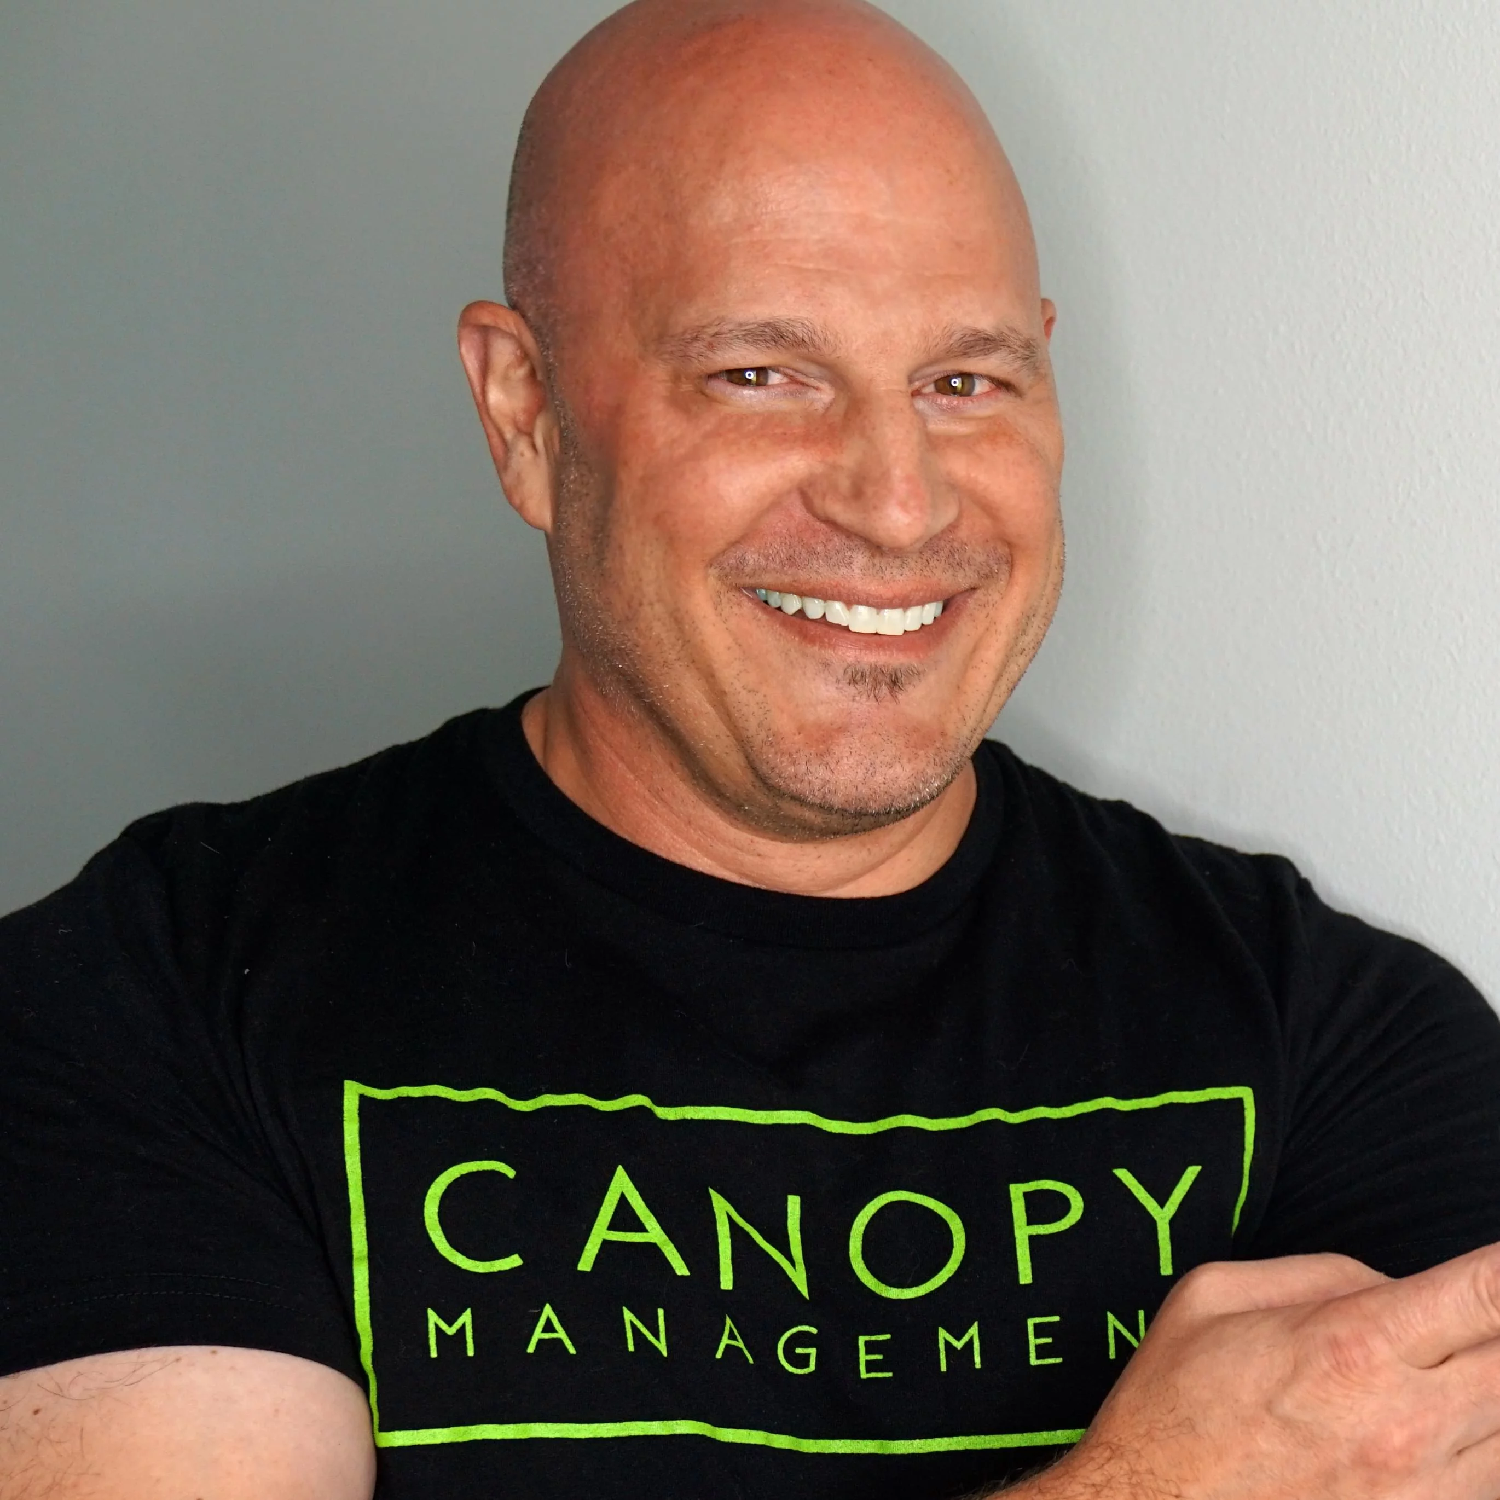 Brian Johnson, Founder of CANOPY Management